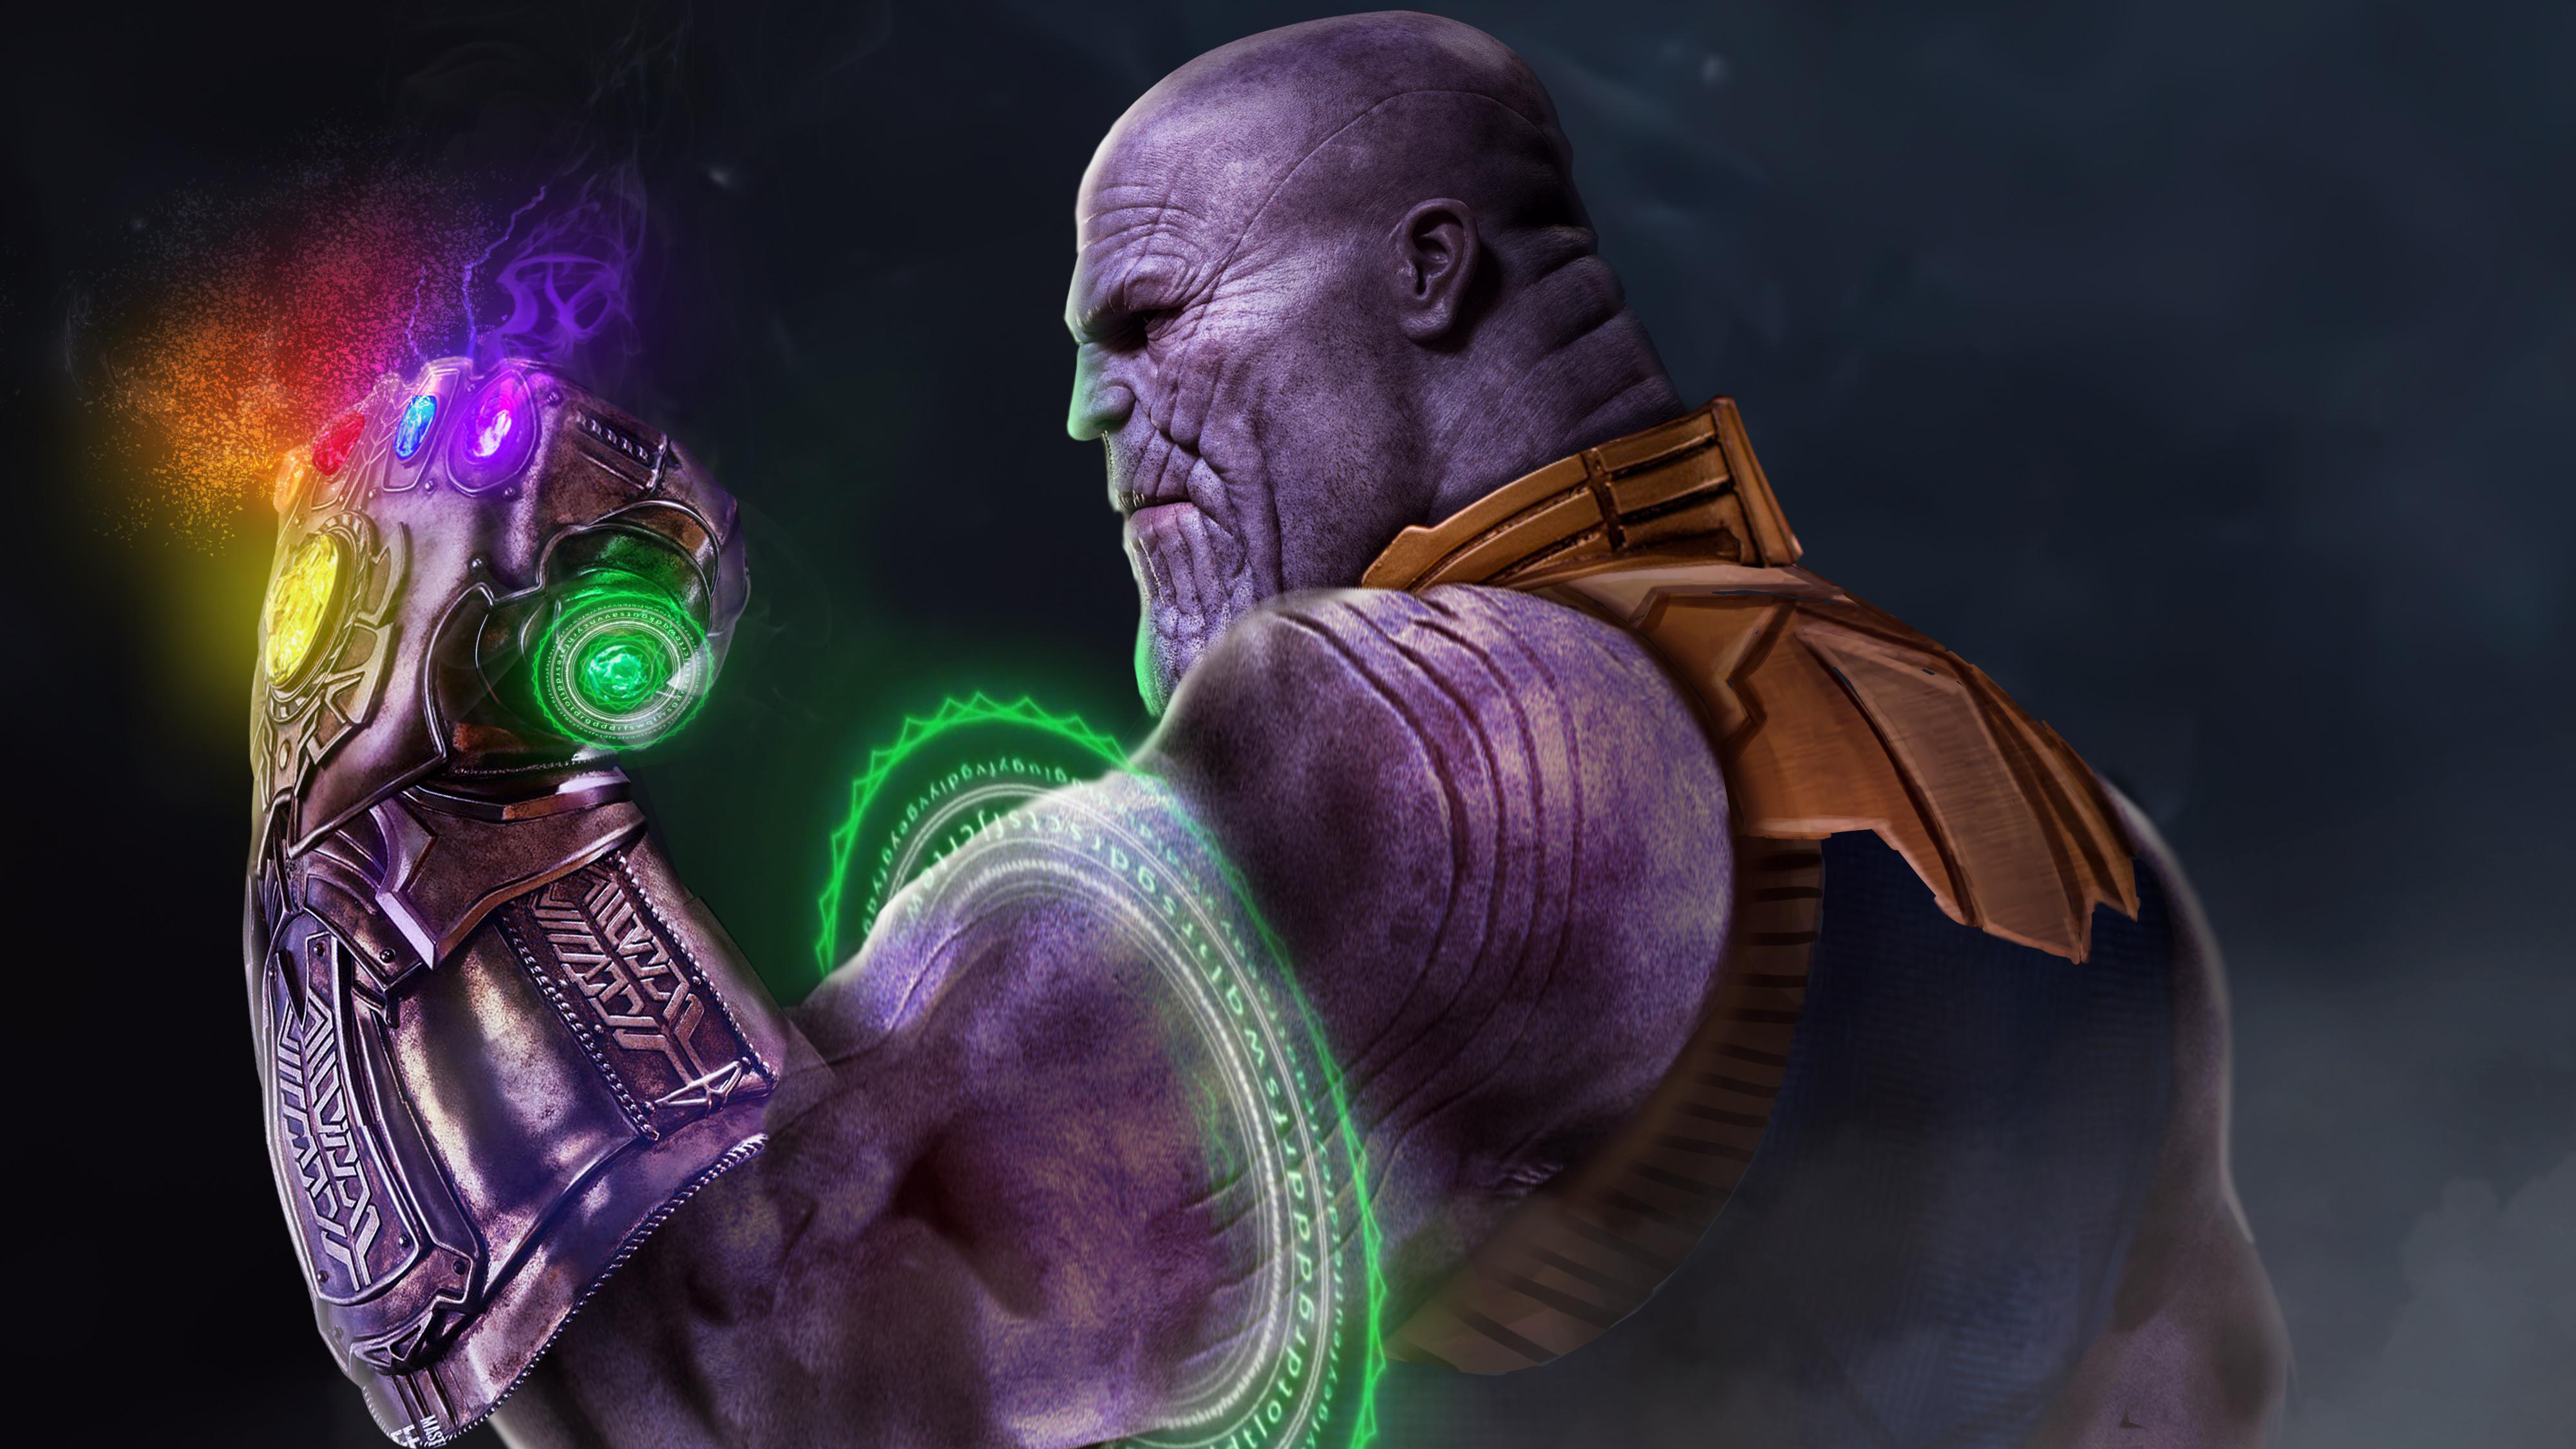 Thanos with Infinity Gauntlet 4K